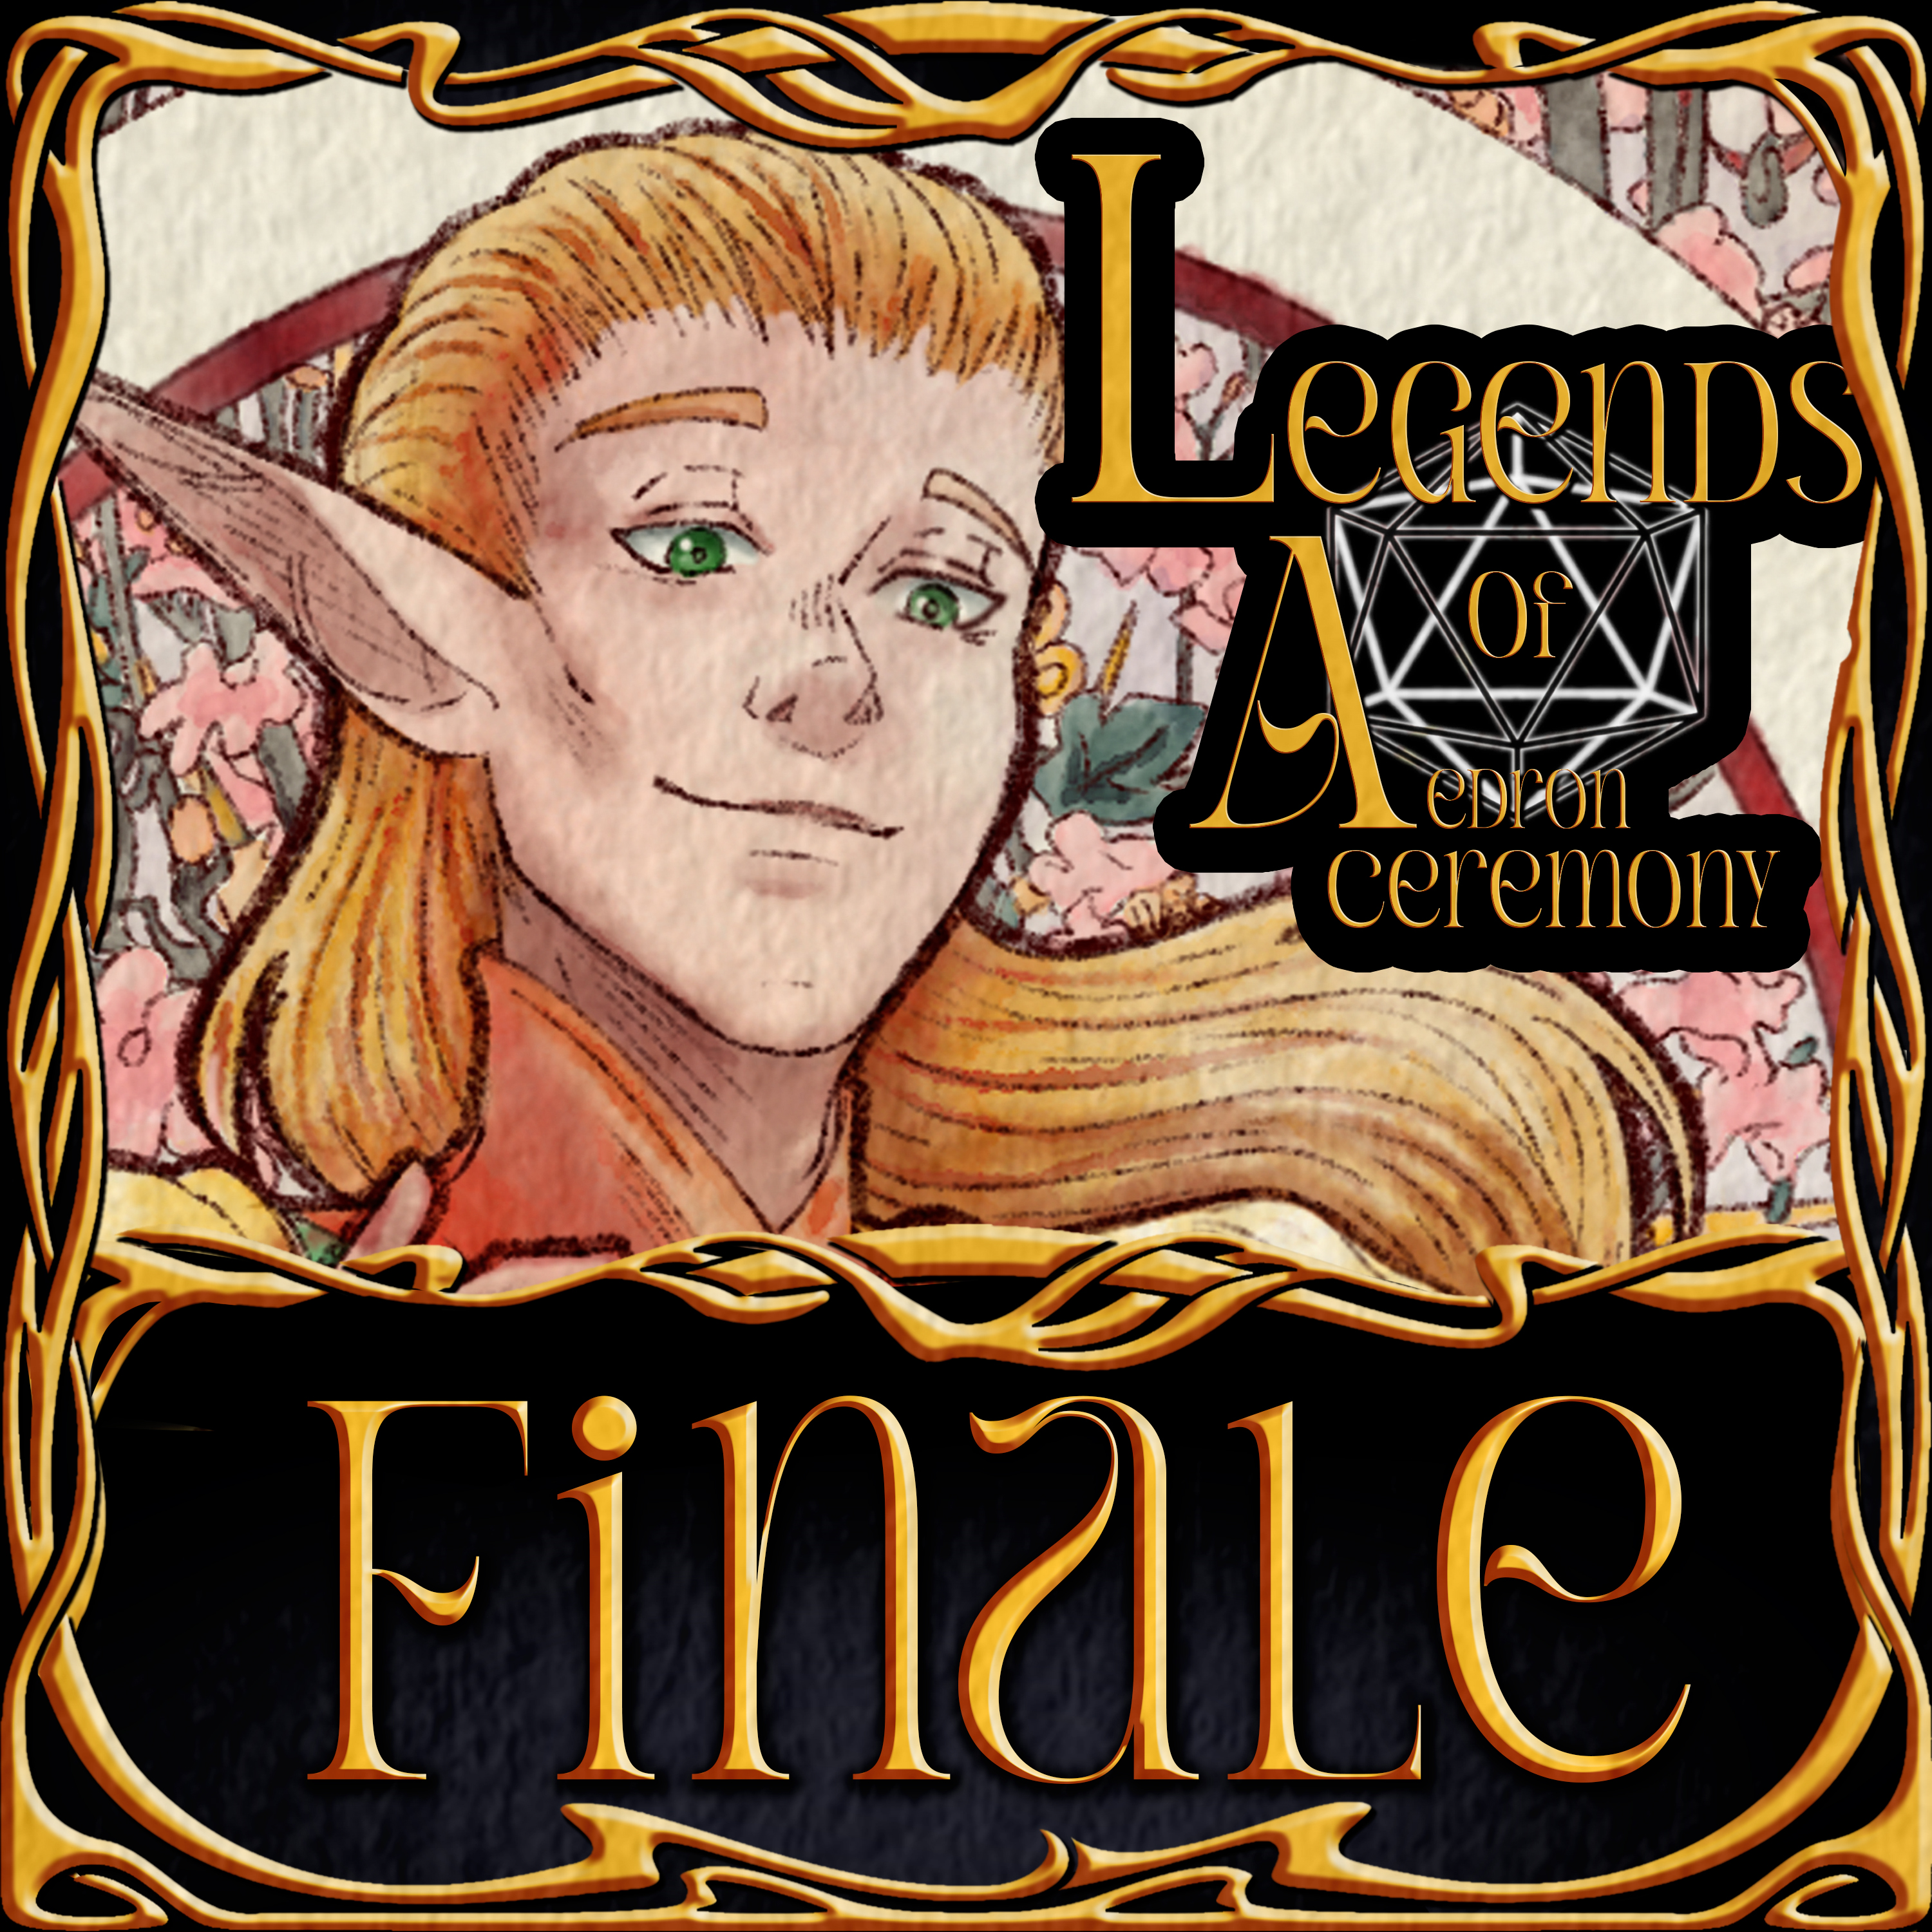 Legends of Aedron: Ceremony Finale: Beacon of the Hive